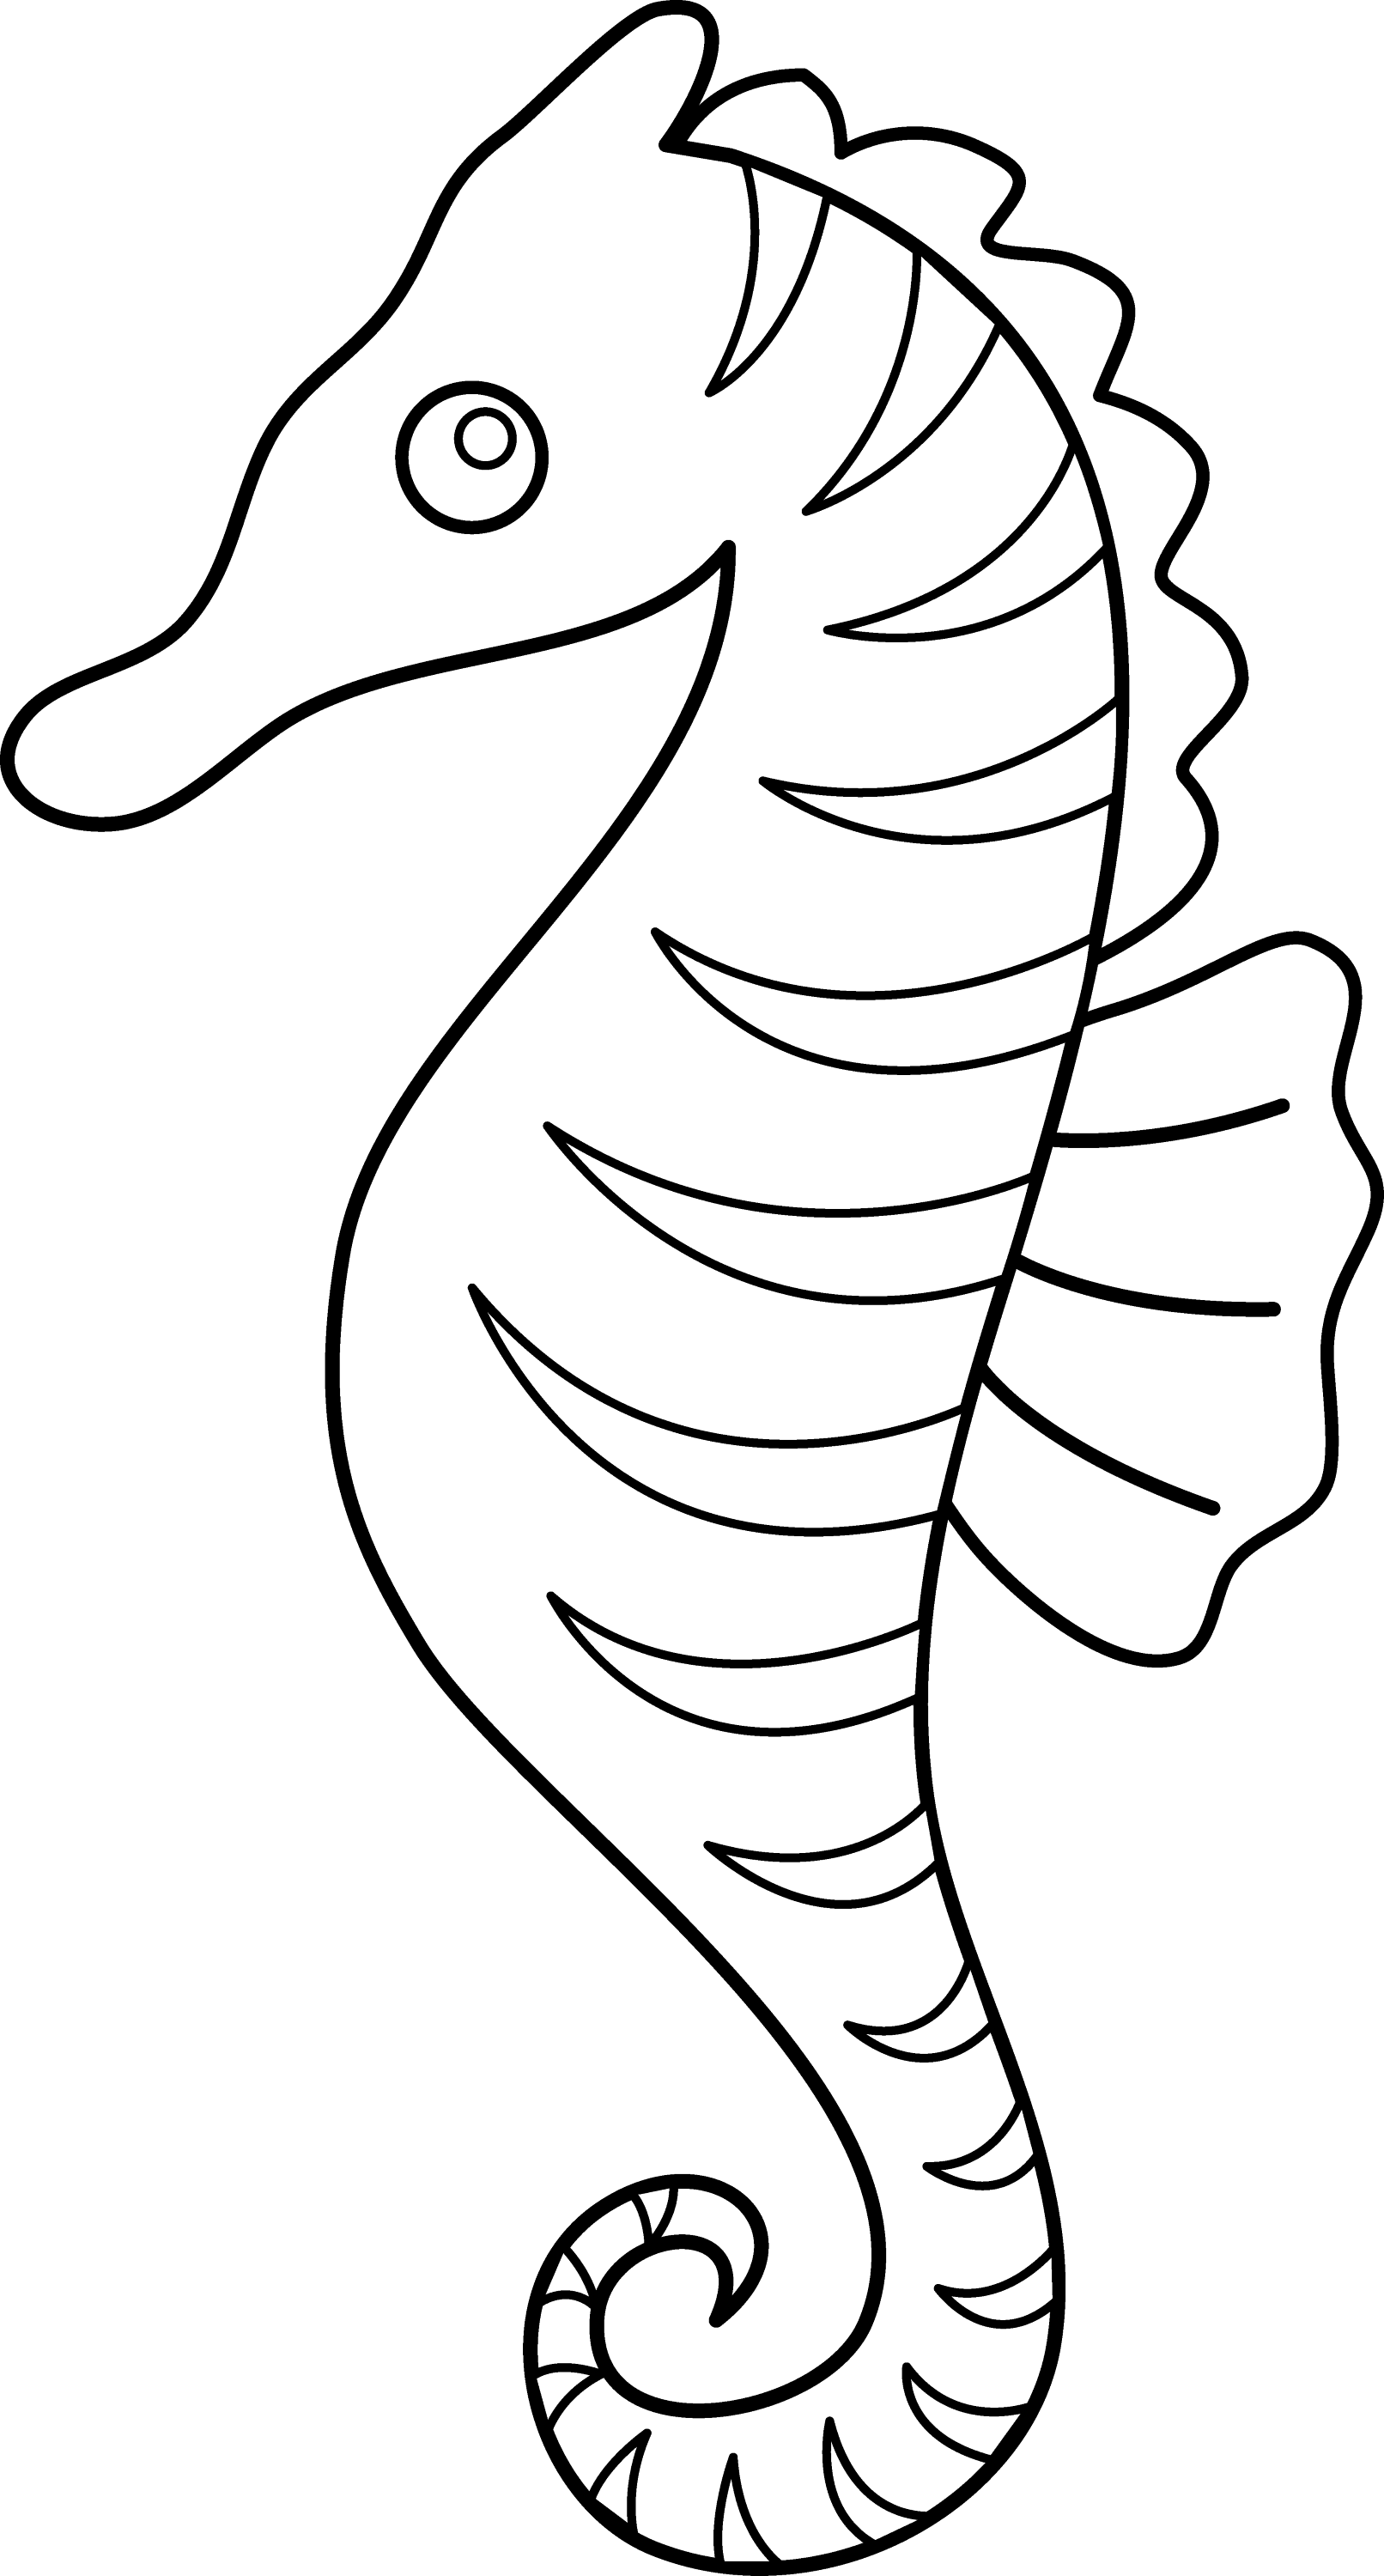 Download Seahorse Coloring Page - Free Clip Art